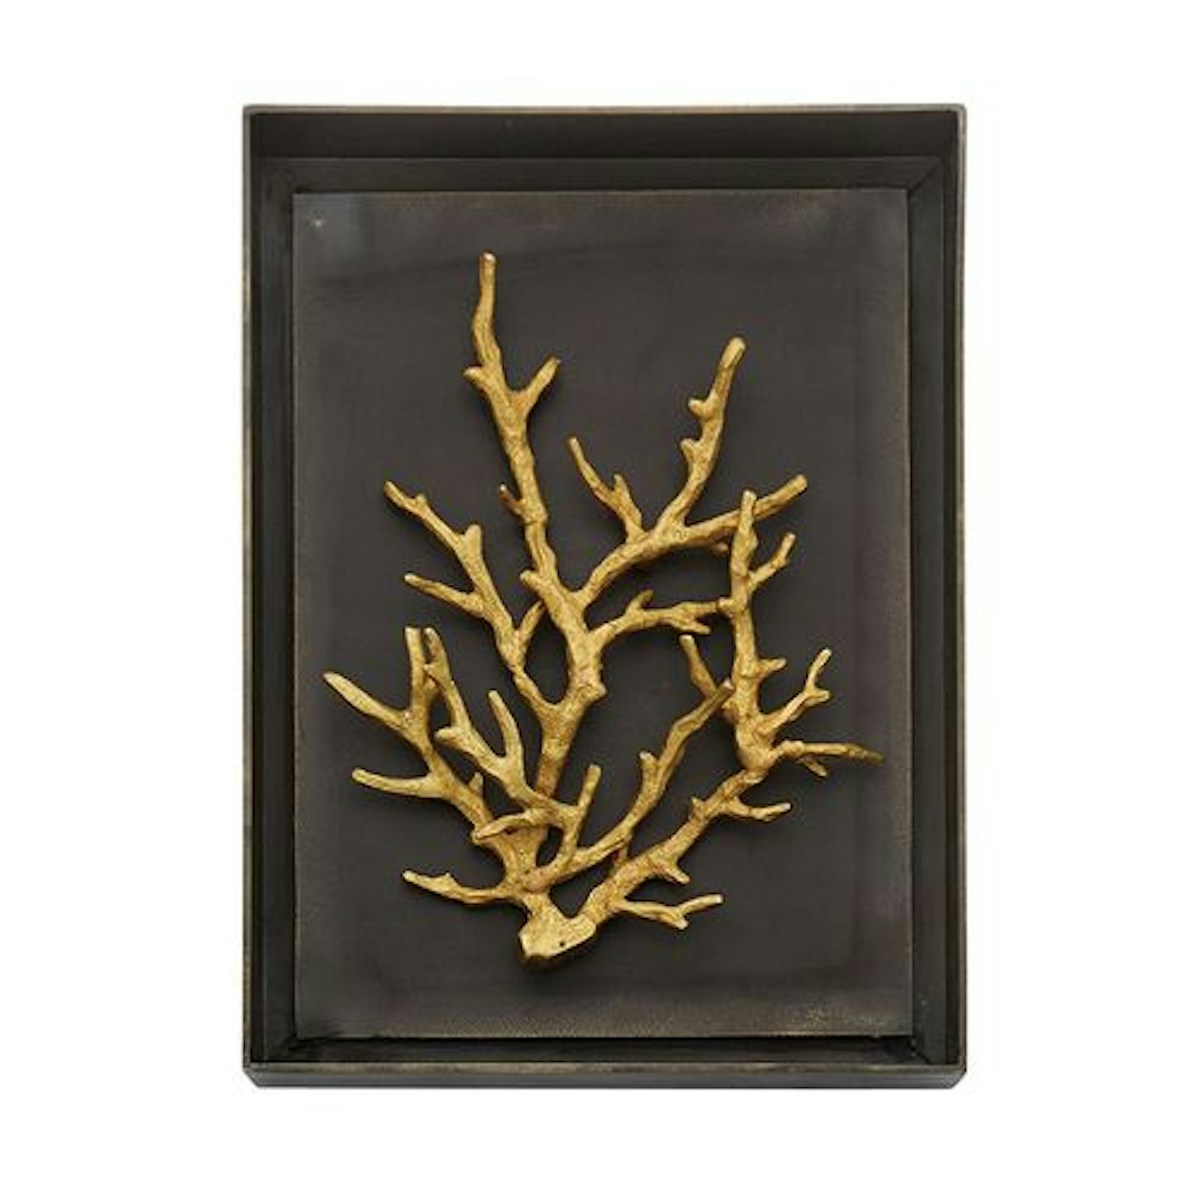 Ocean Coral Shadow Box - 6 Best Coral Decor Ideas To Buy For Your Home - LuxDeco.com